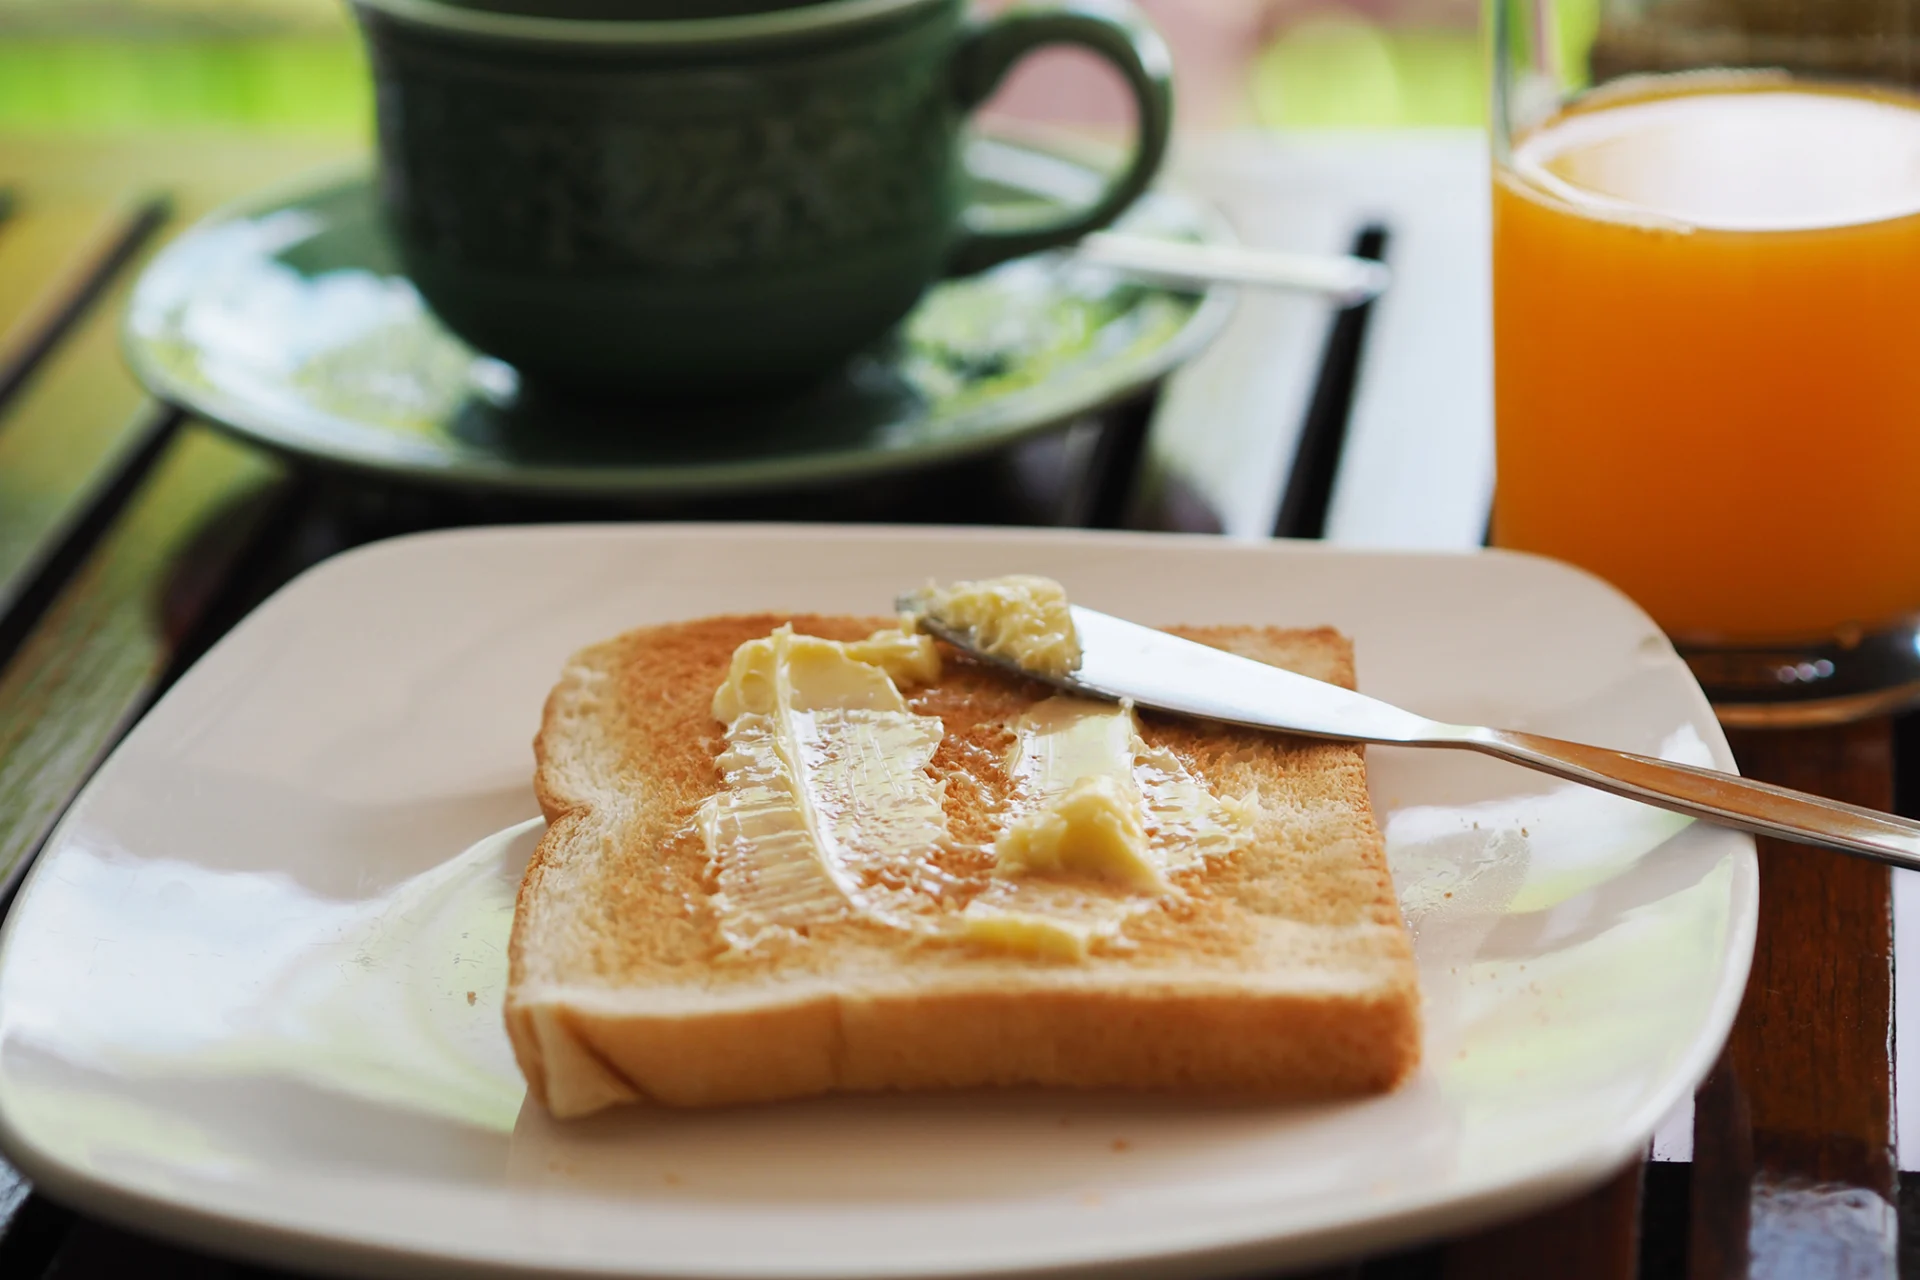 A buttered piece of toast on a plate. Behind it there is some orange juice and a cup containing a hot drink.